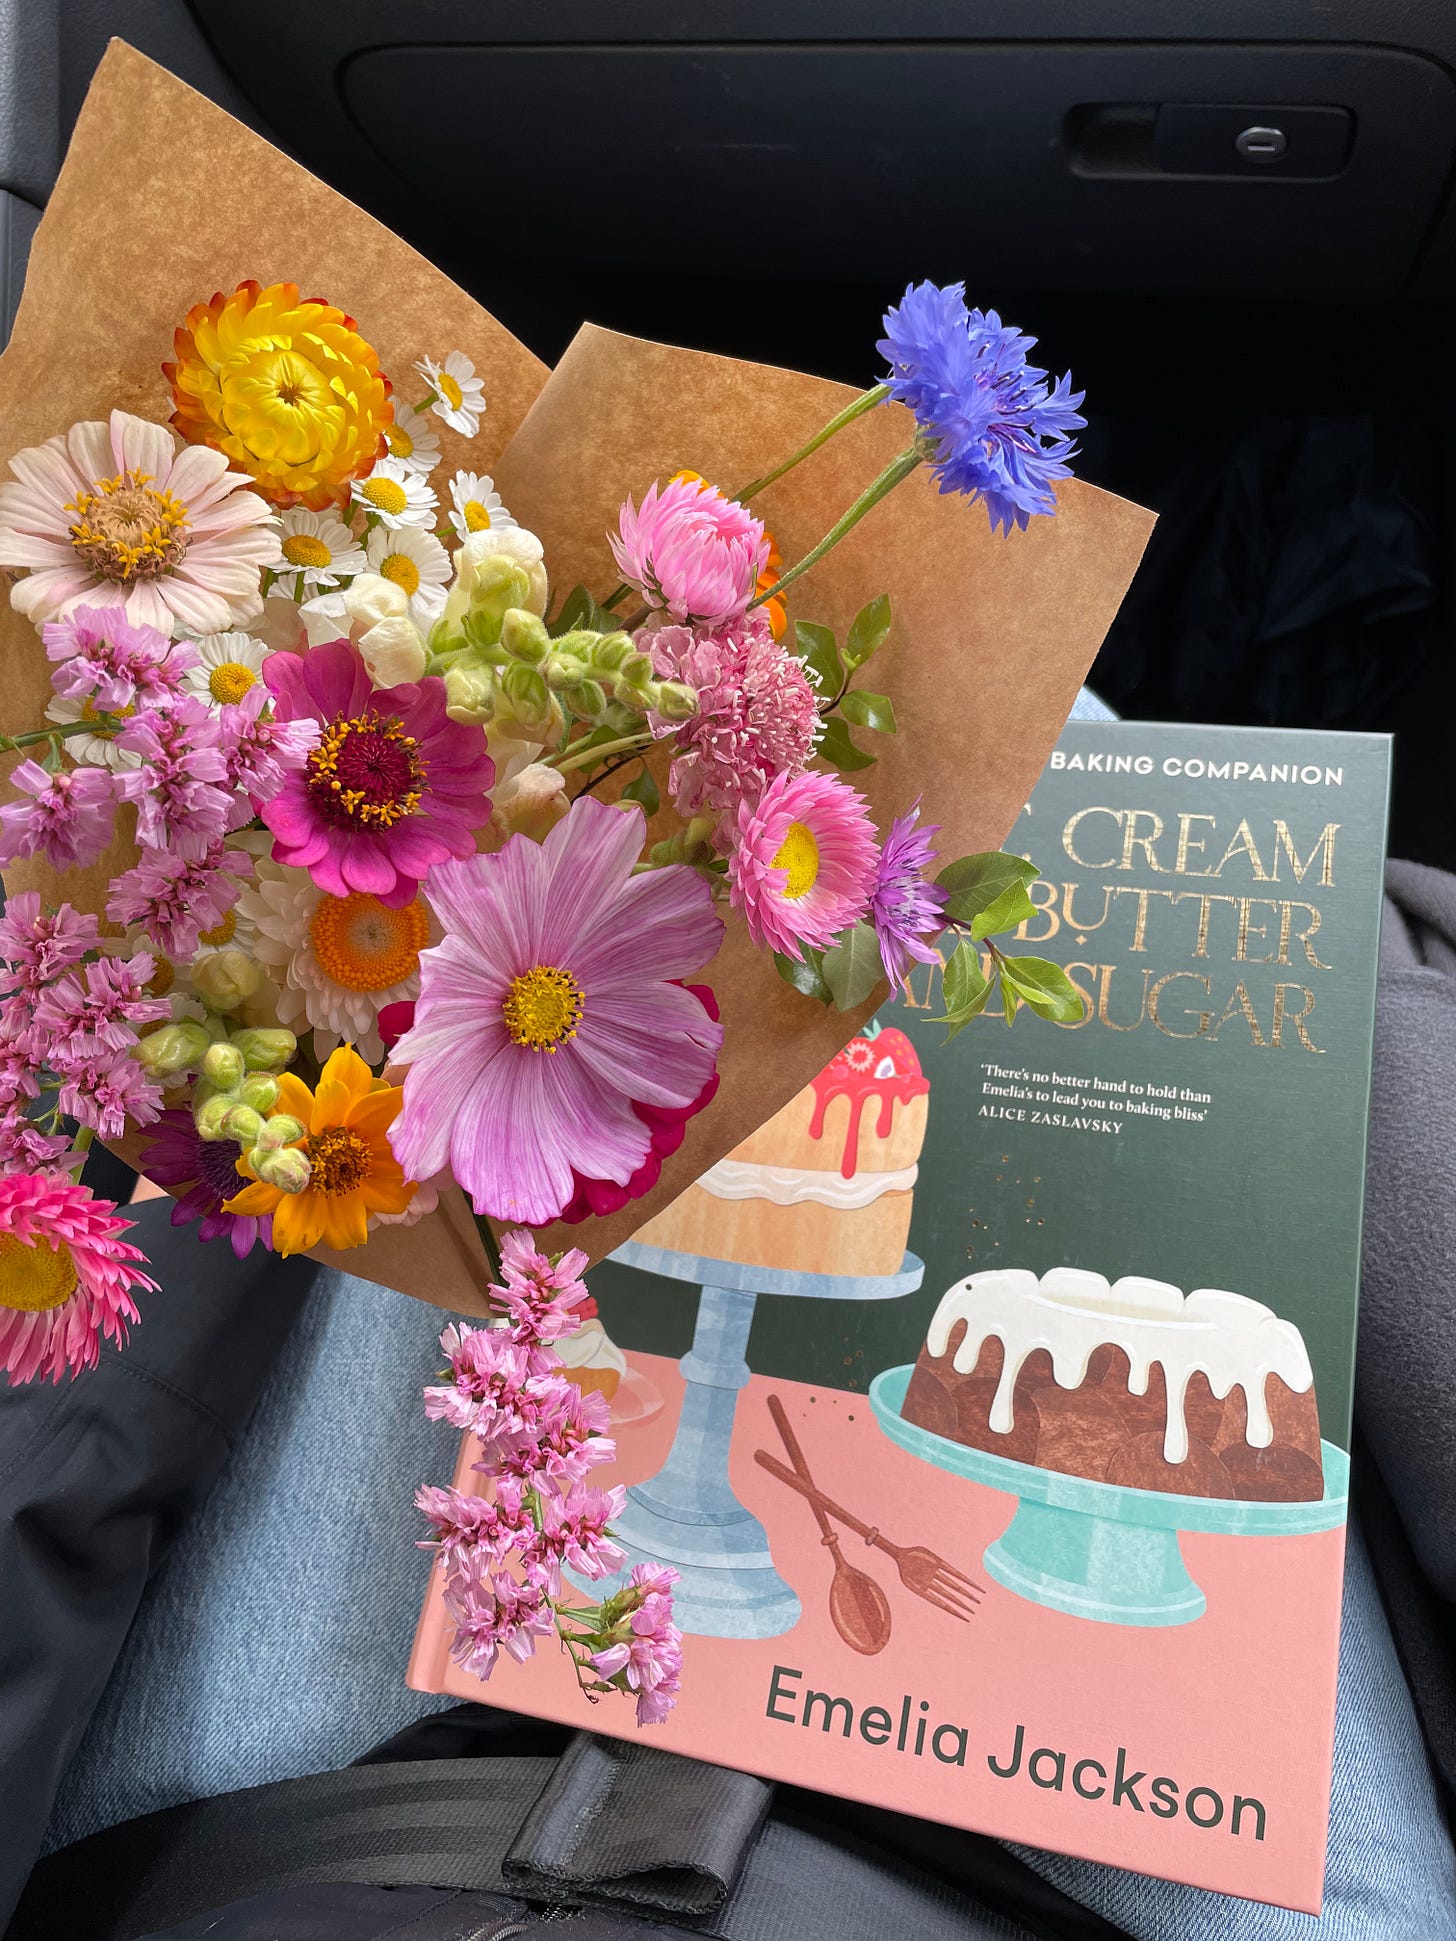 Bunch of flowers and a baking cookbook, taken in a car.